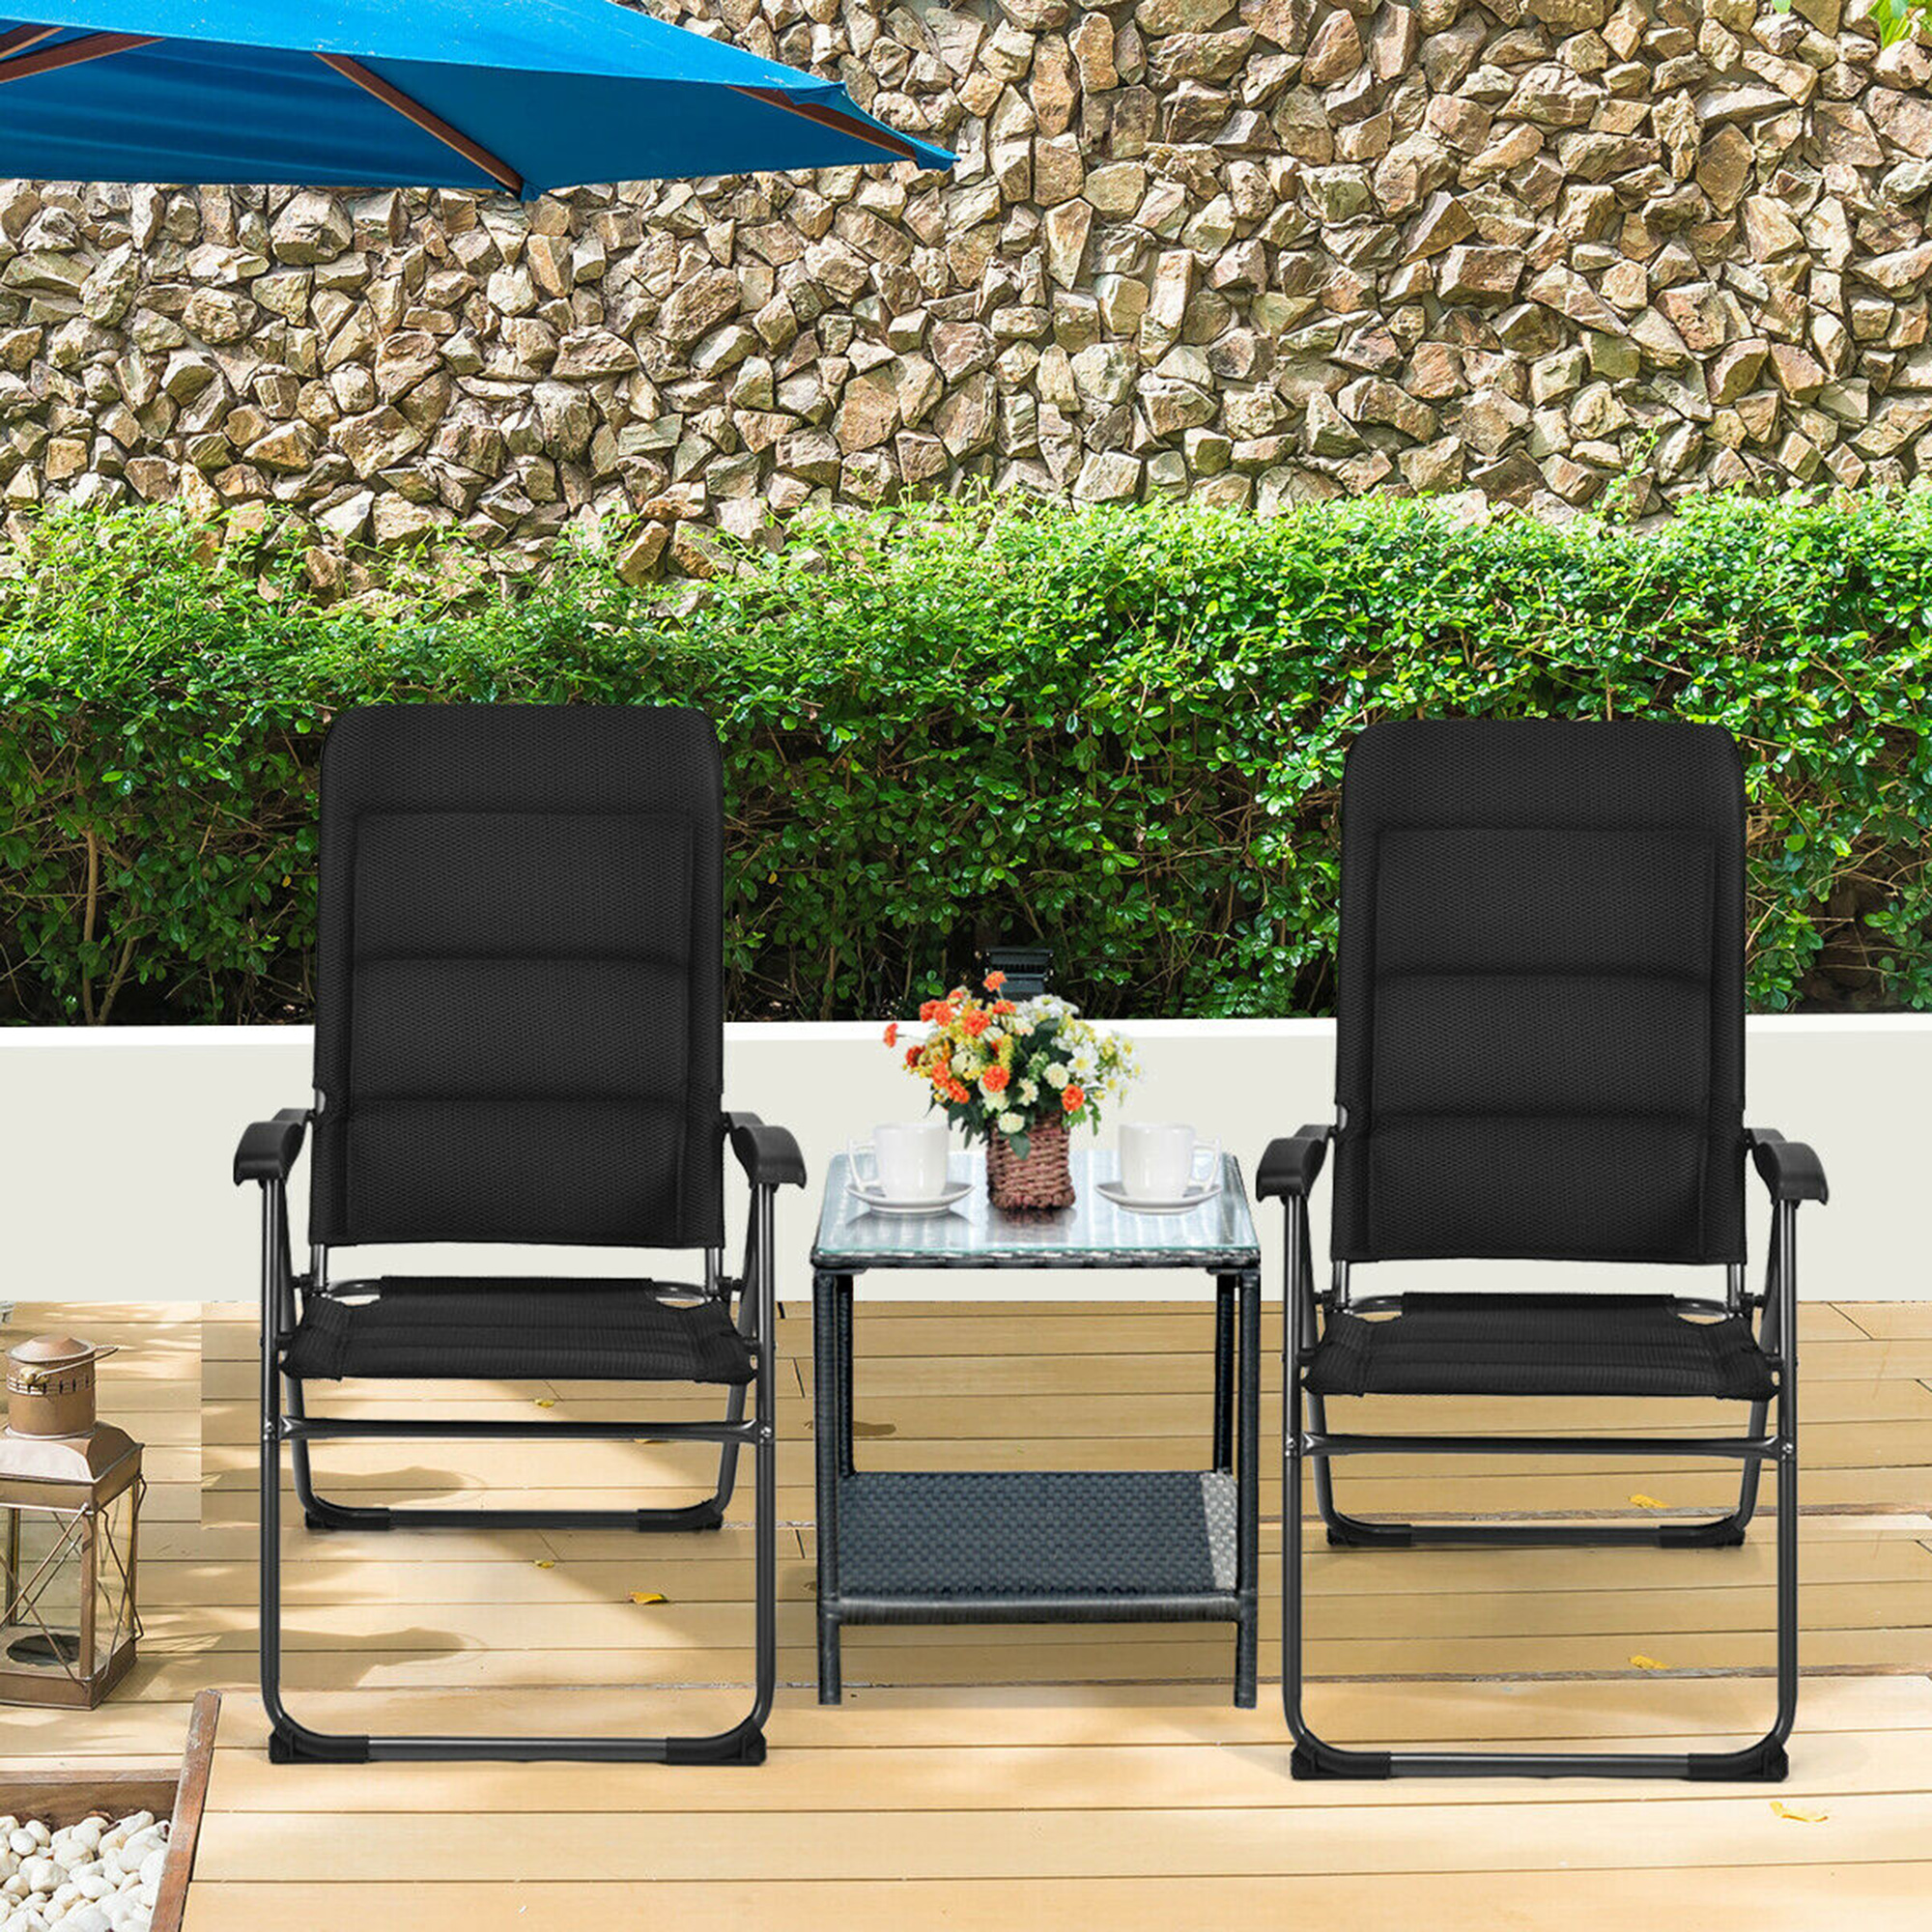 Gymax 2PCS Patio Folding Chairs Back Adjustable Reclining Padded Garden Furniture - image 3 of 10